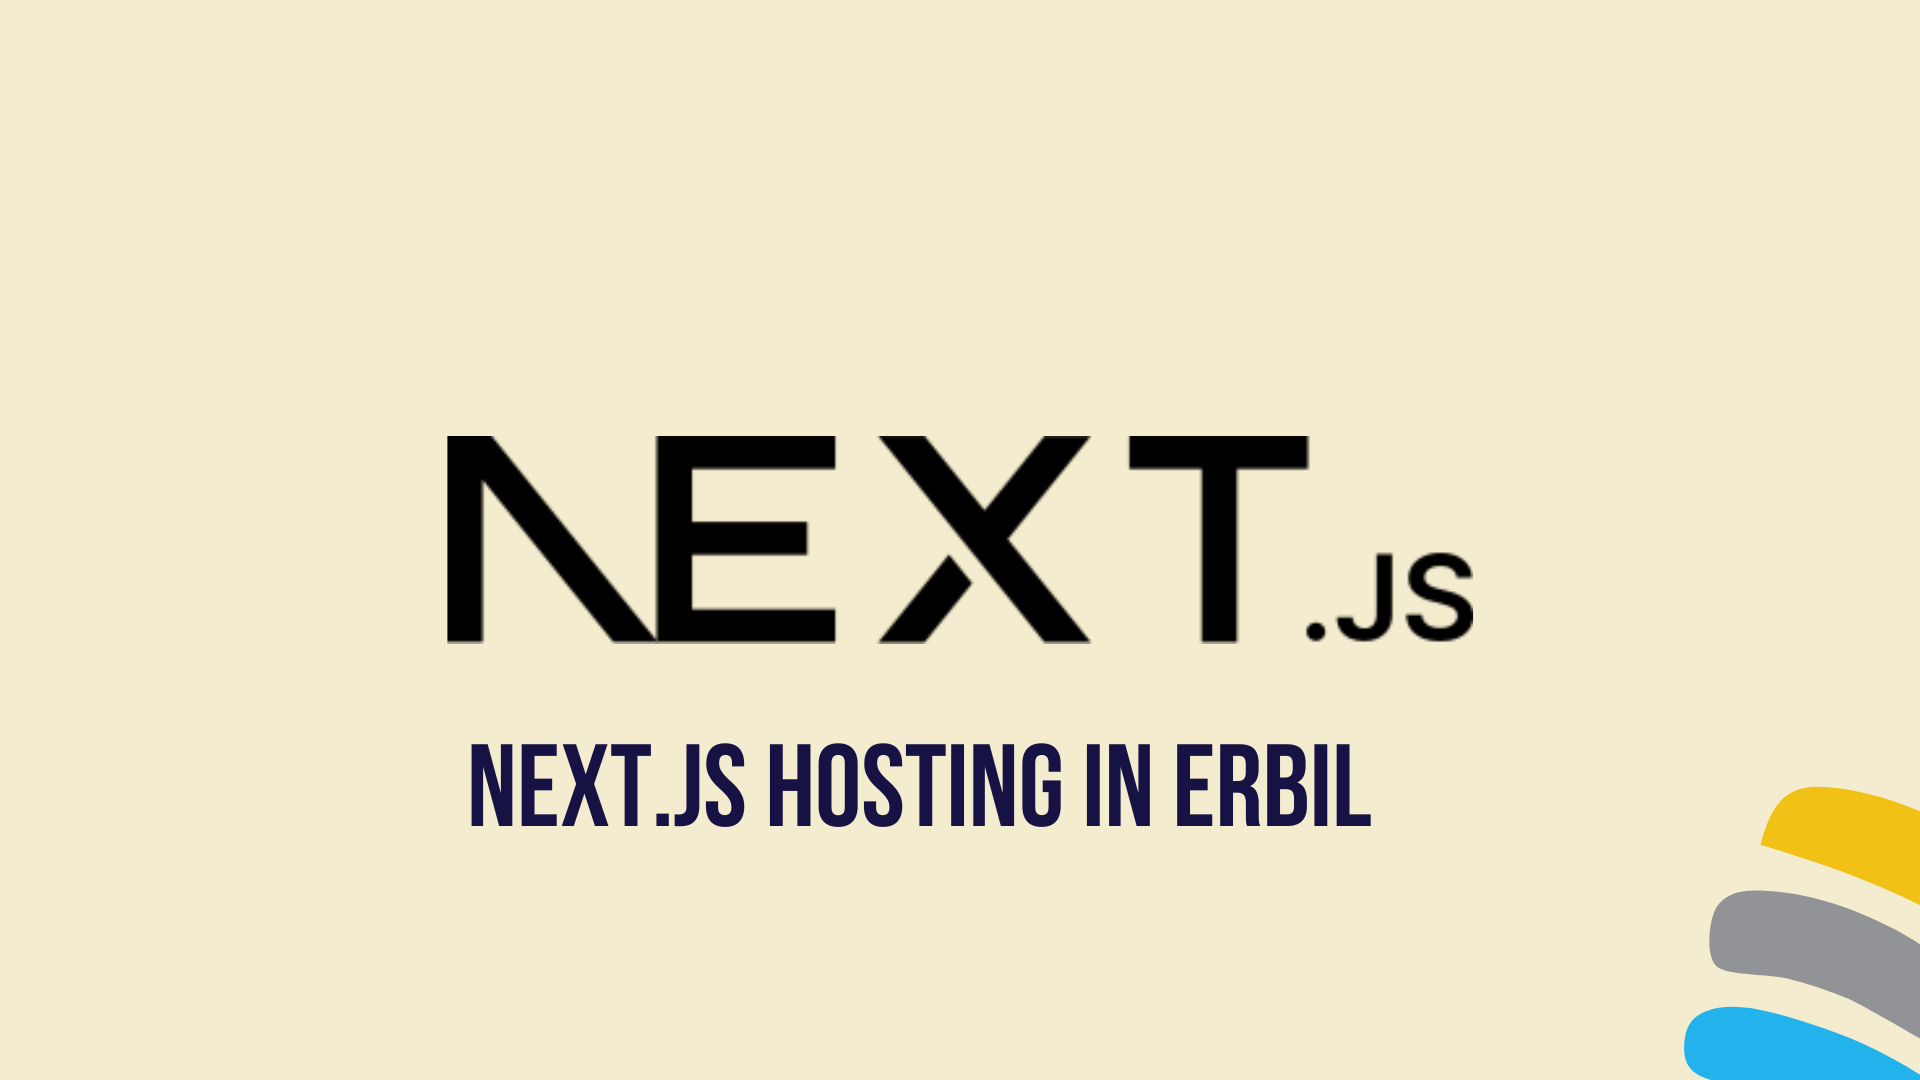 Next.js hosting in Erbil and The Perfect Scalable VPS from Linkdata.com: An Unbeatable Combo